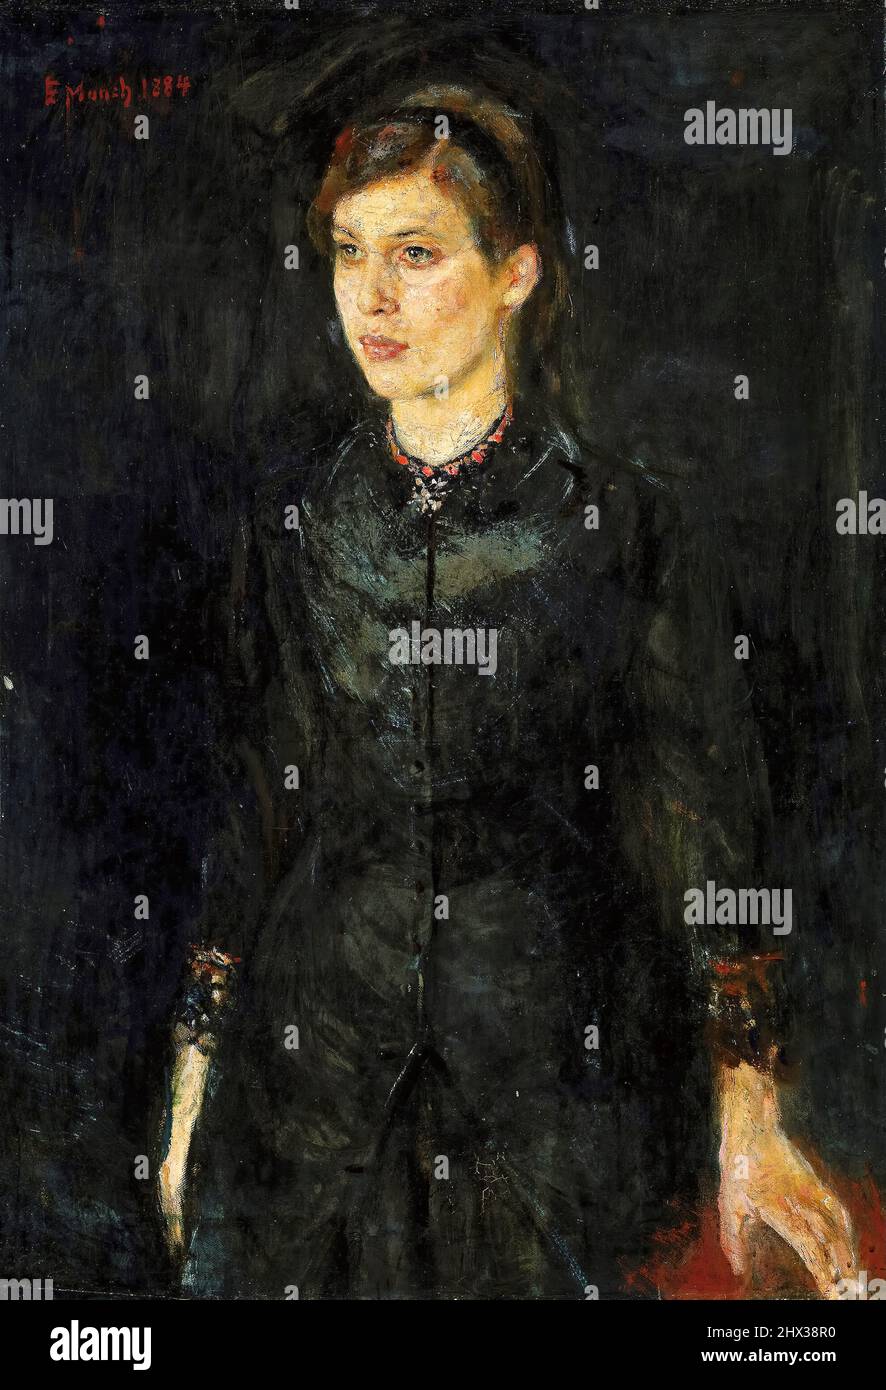 Inger in Black, portrait painting of the artist's Sister in oil on canvas by Edvard Munch, 1884 Stock Photo